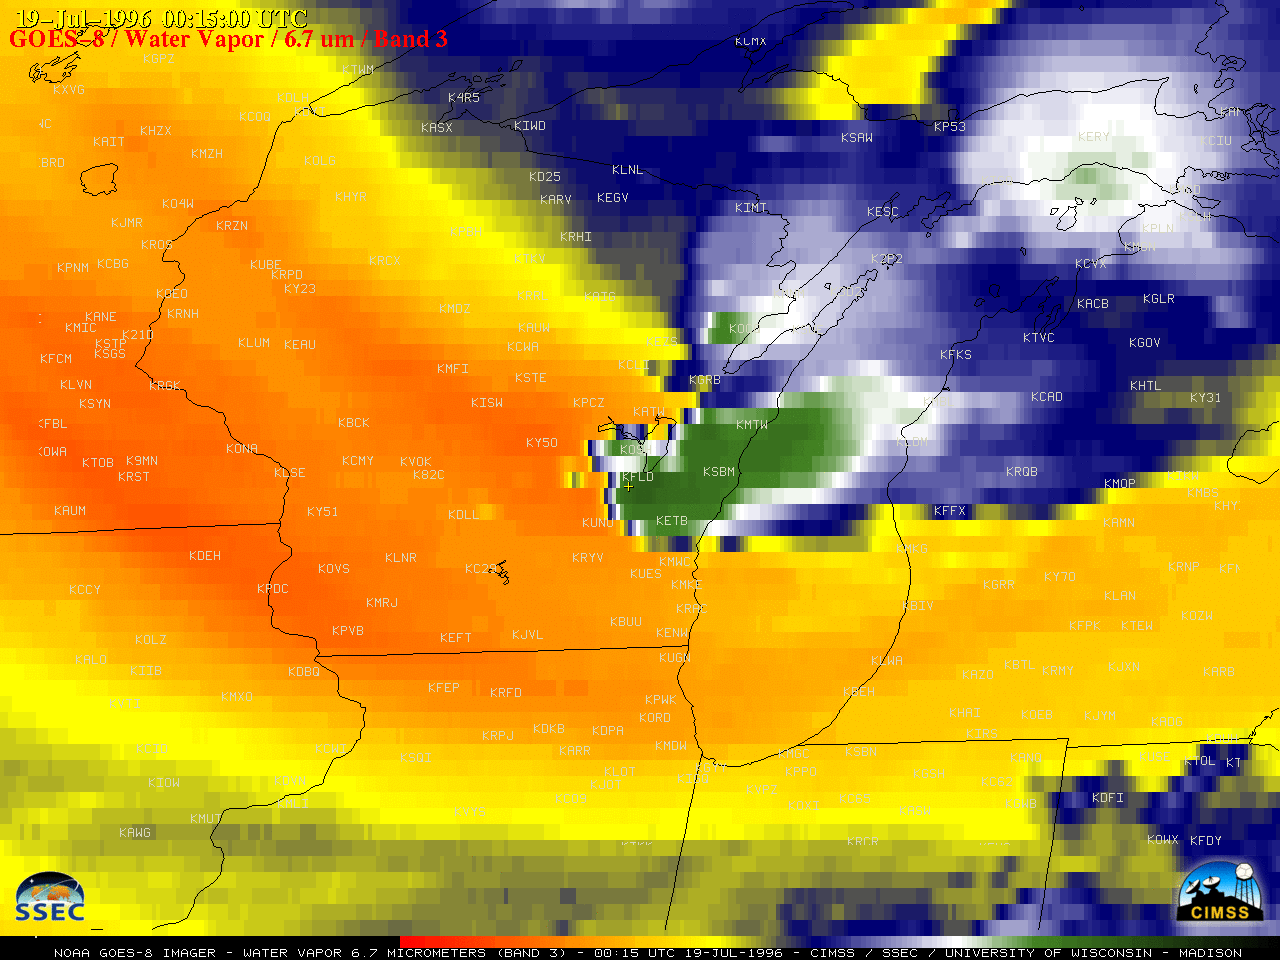 GOES-8 Water Vapor images [click to play animation | MP4]